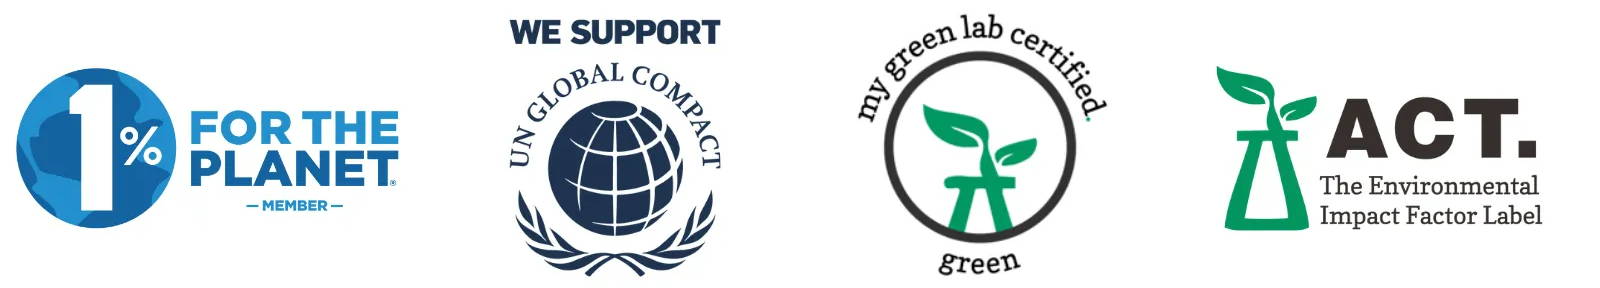 Future Fields is a green-certified lab with products that are ACT Label certified. Future Fields supports the United Nations Global Compact and 1% for the Planet.